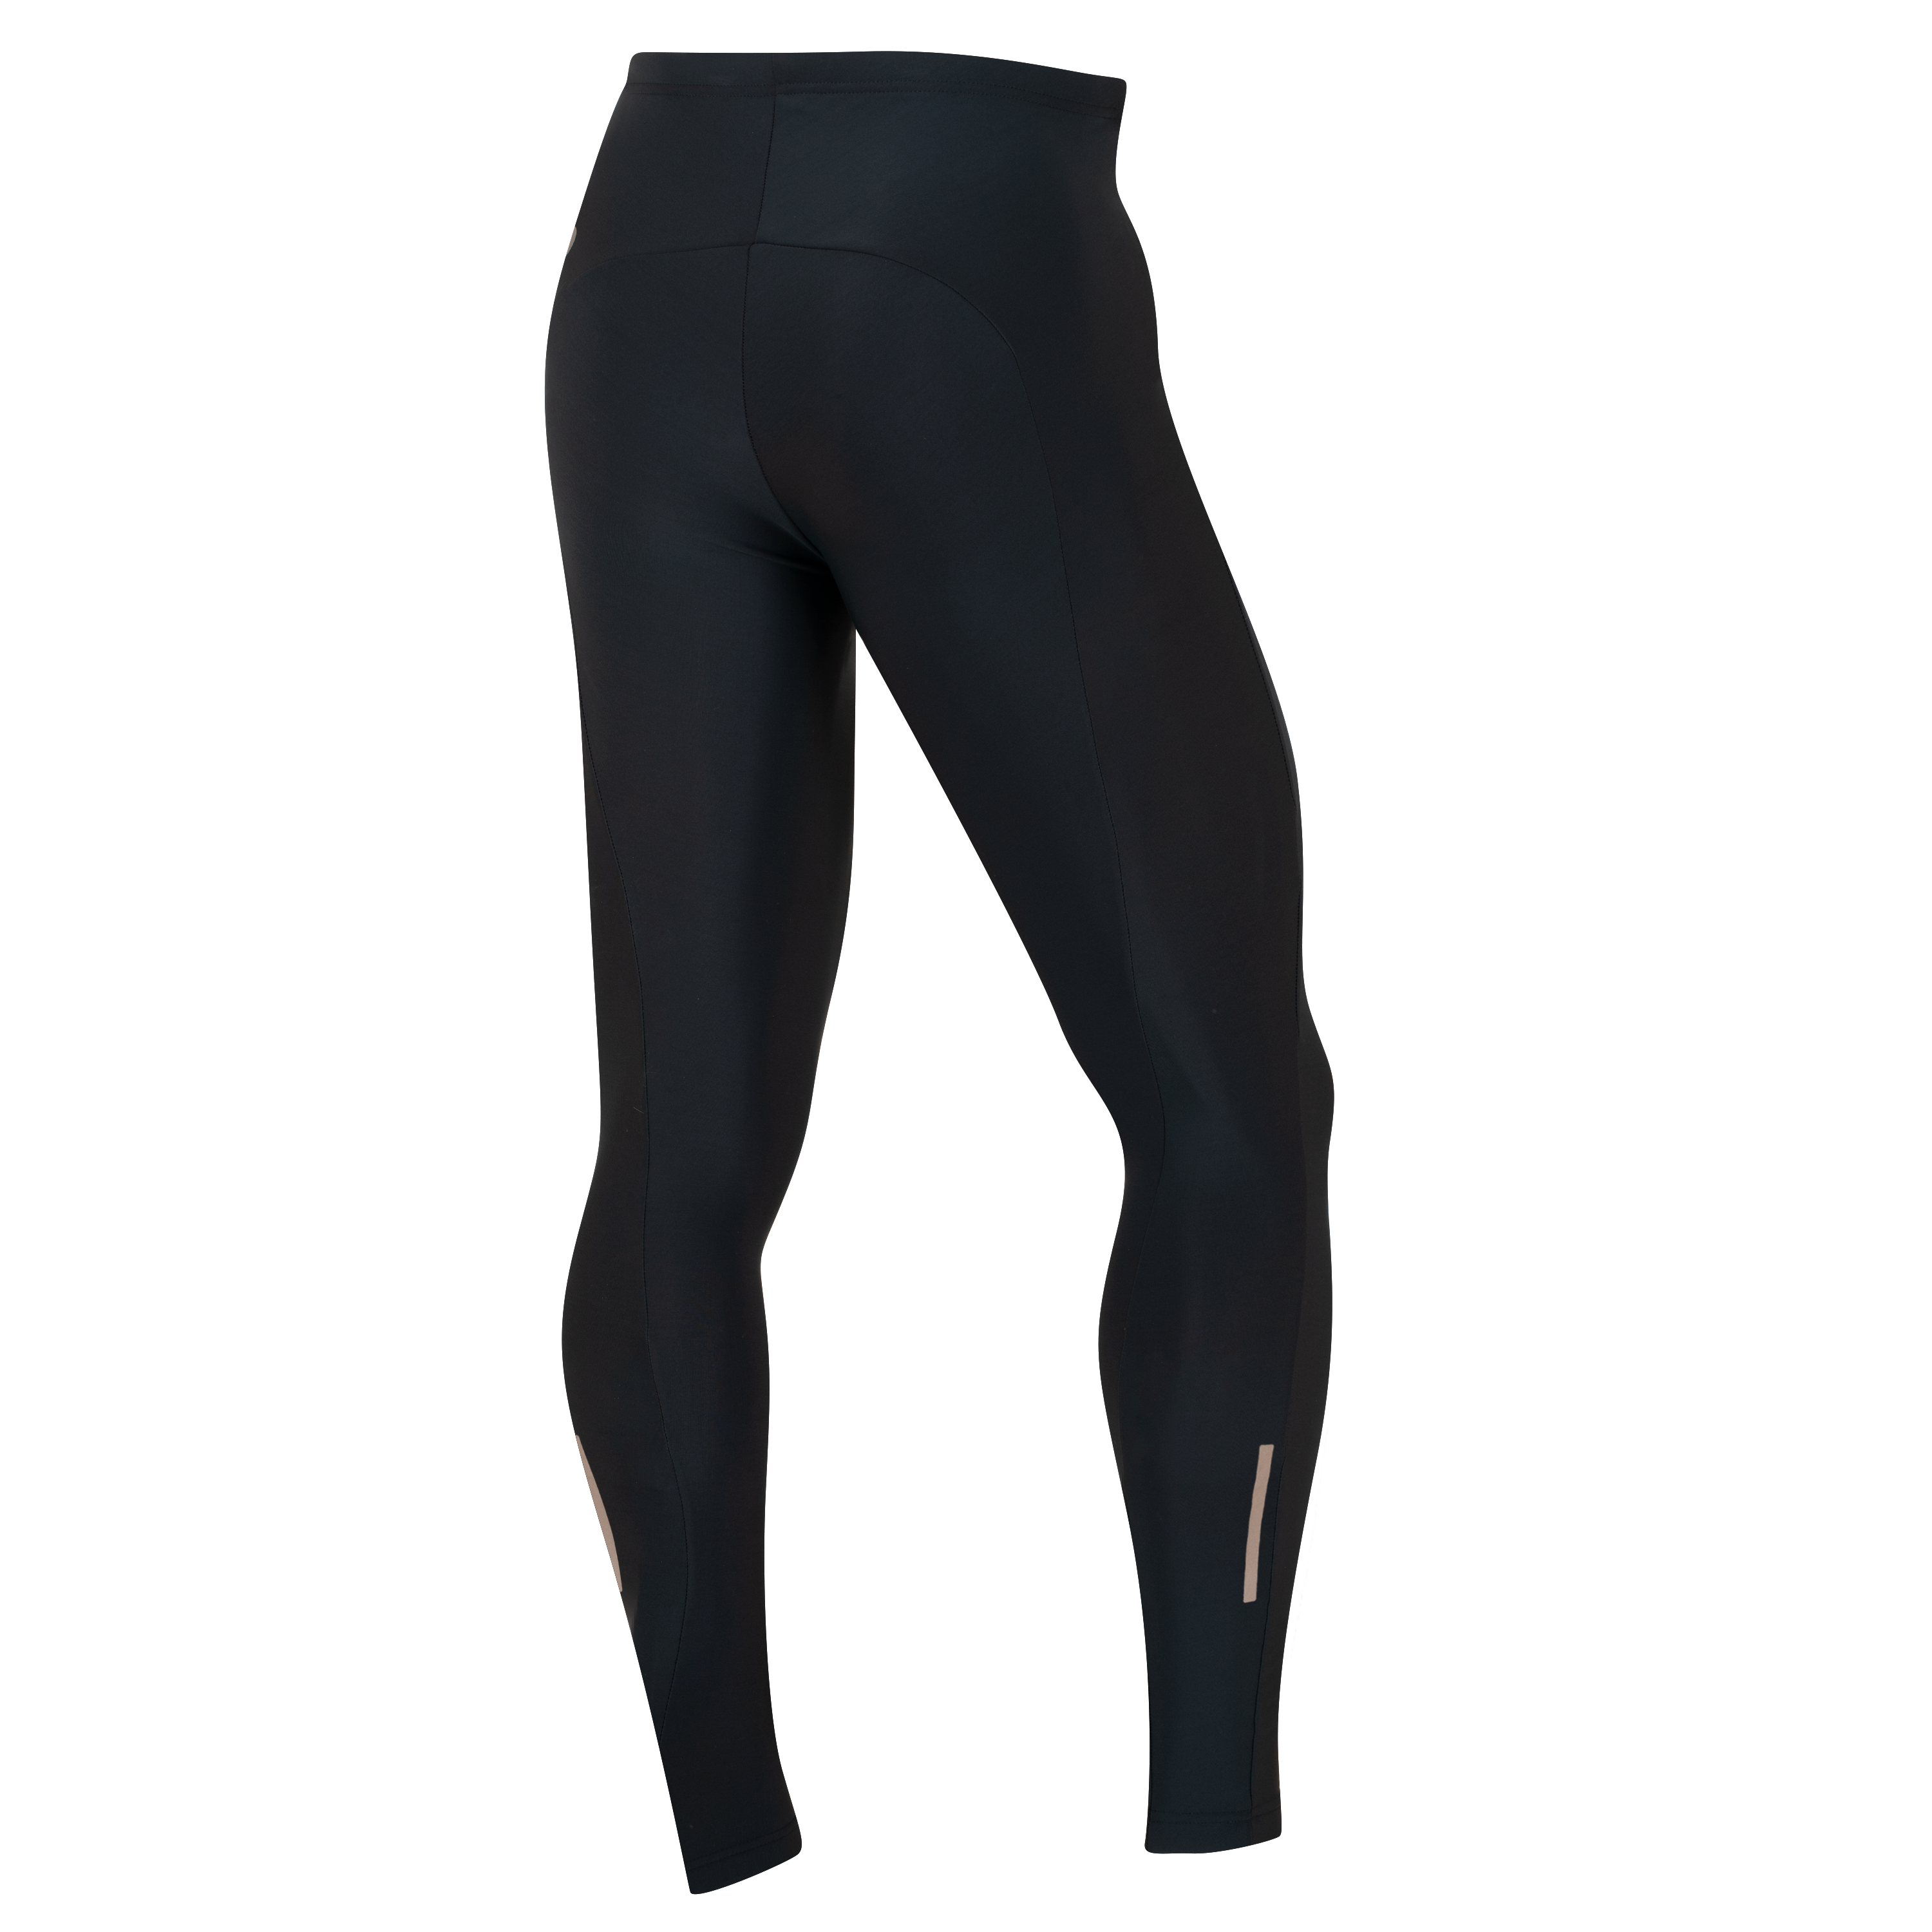 PEARL iZUMi Quest Thermal Cycling Tights - Men's